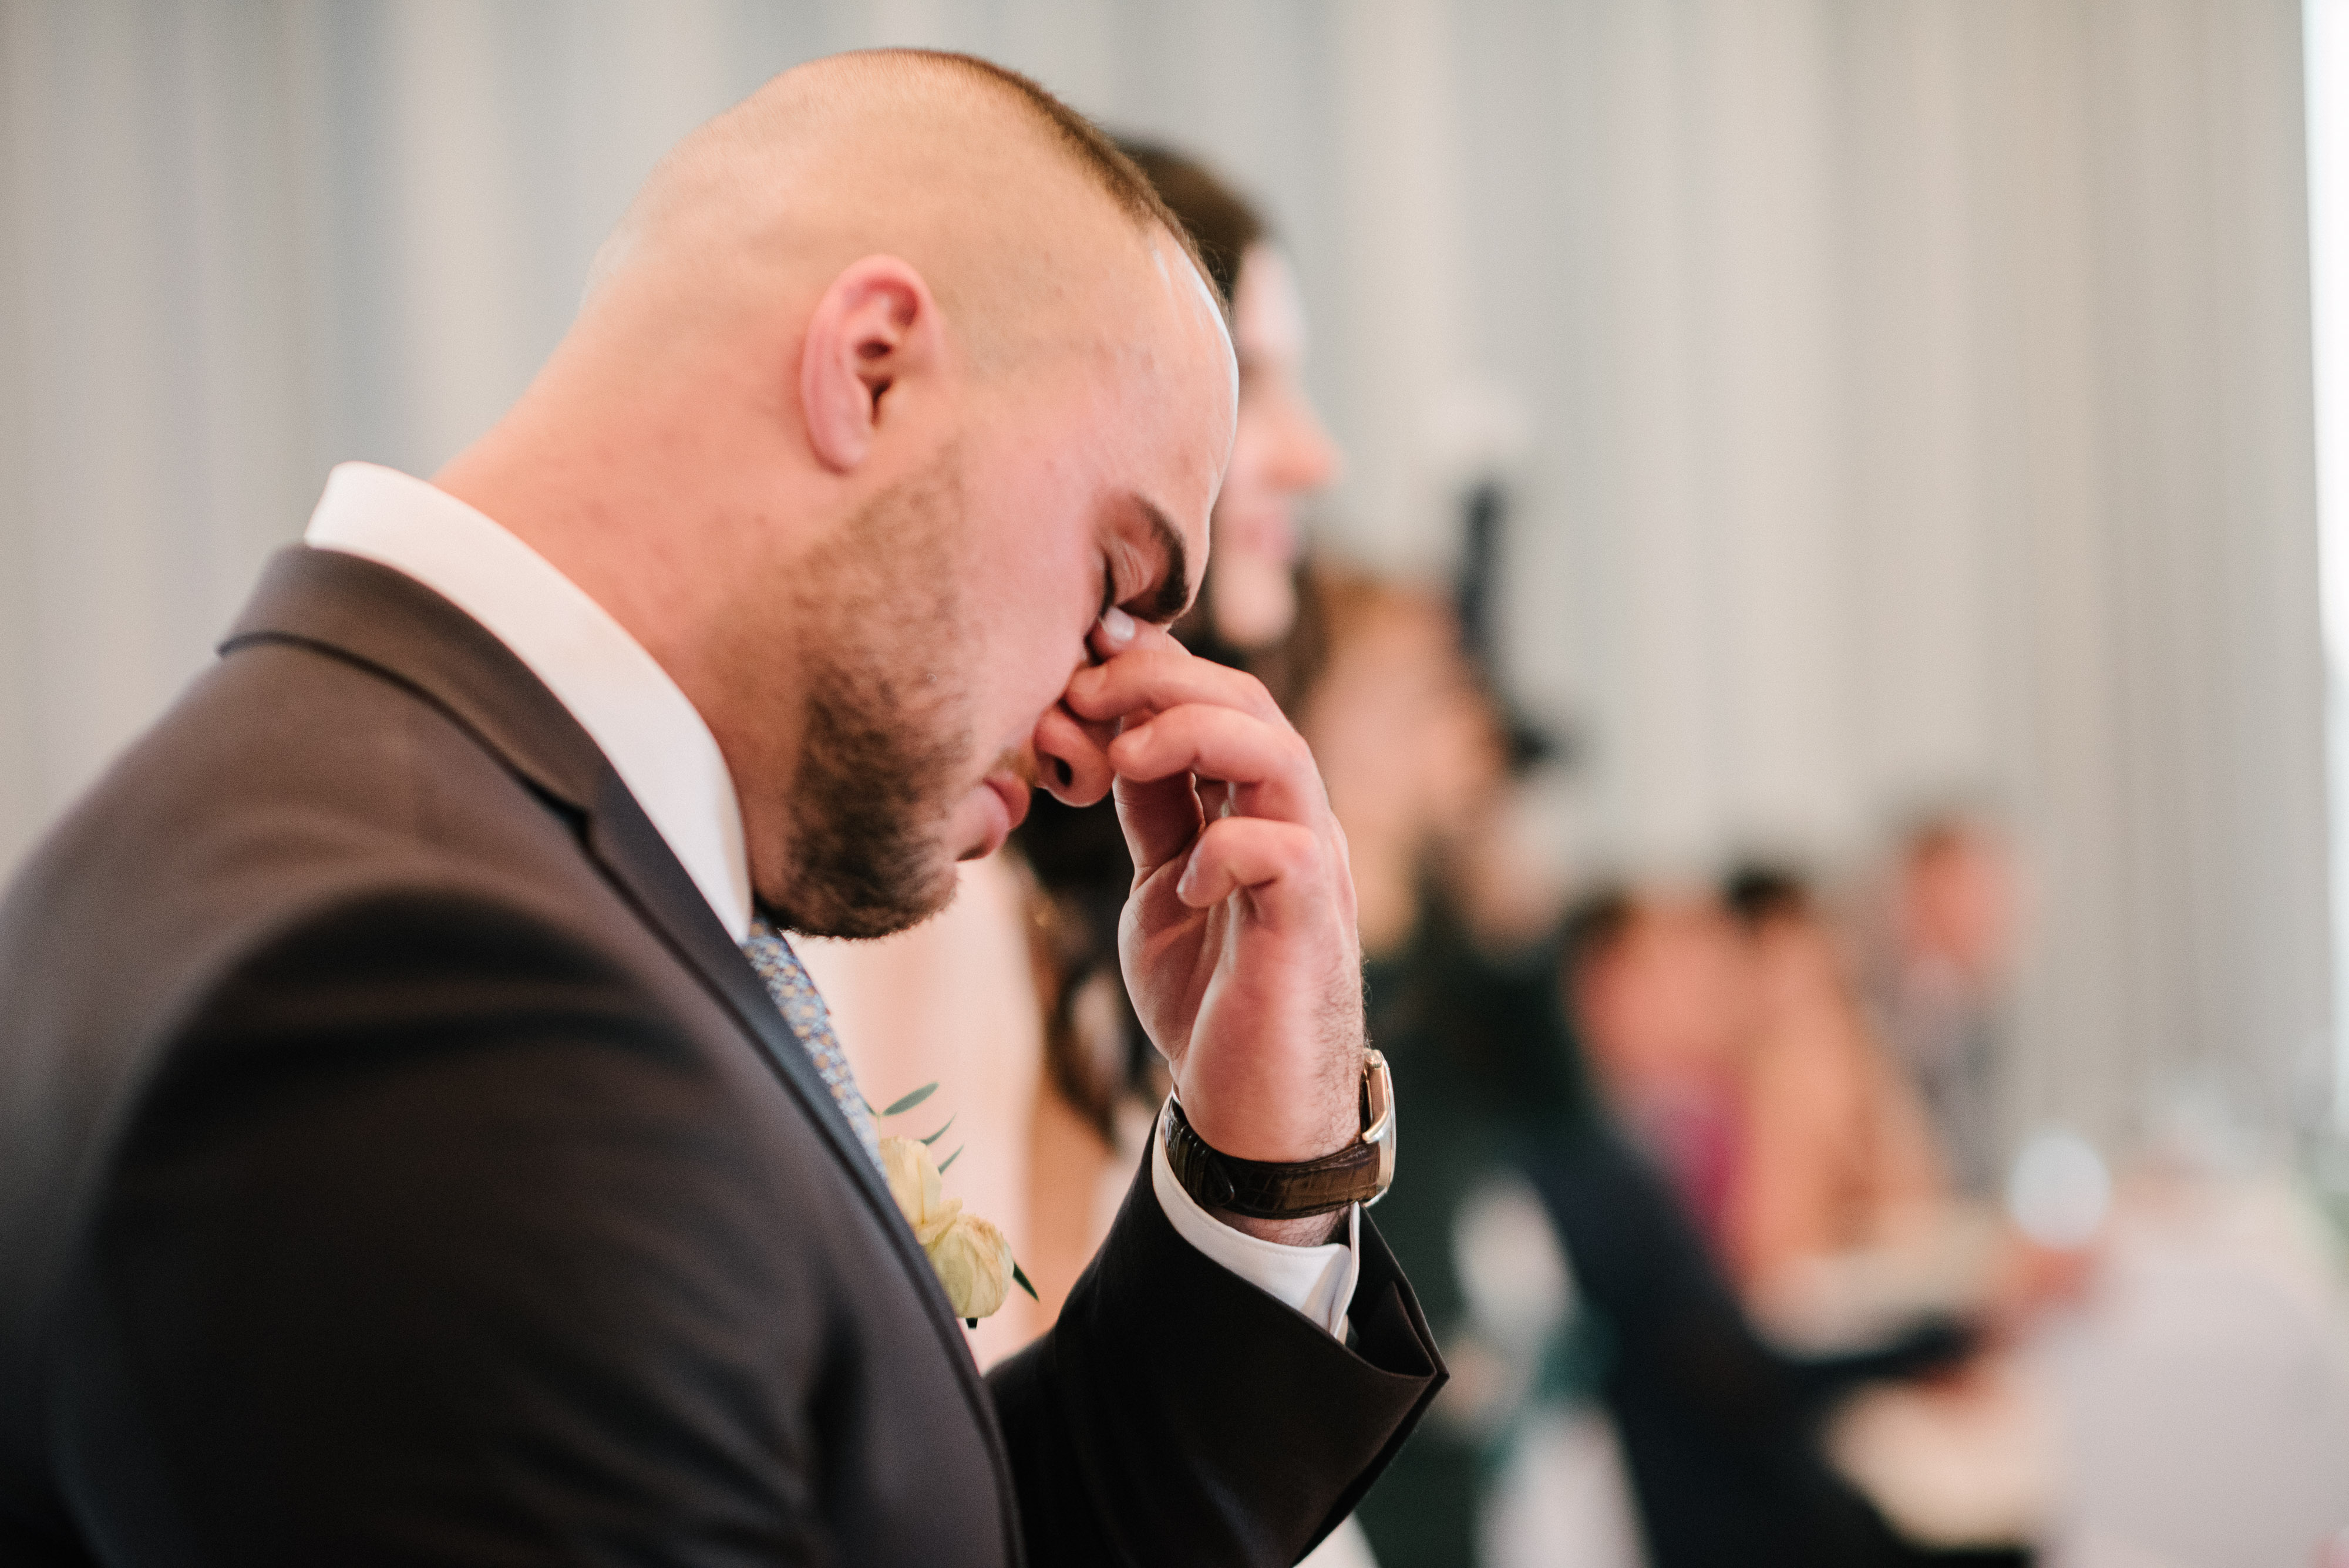 The groom cries | Source: Shutterstock